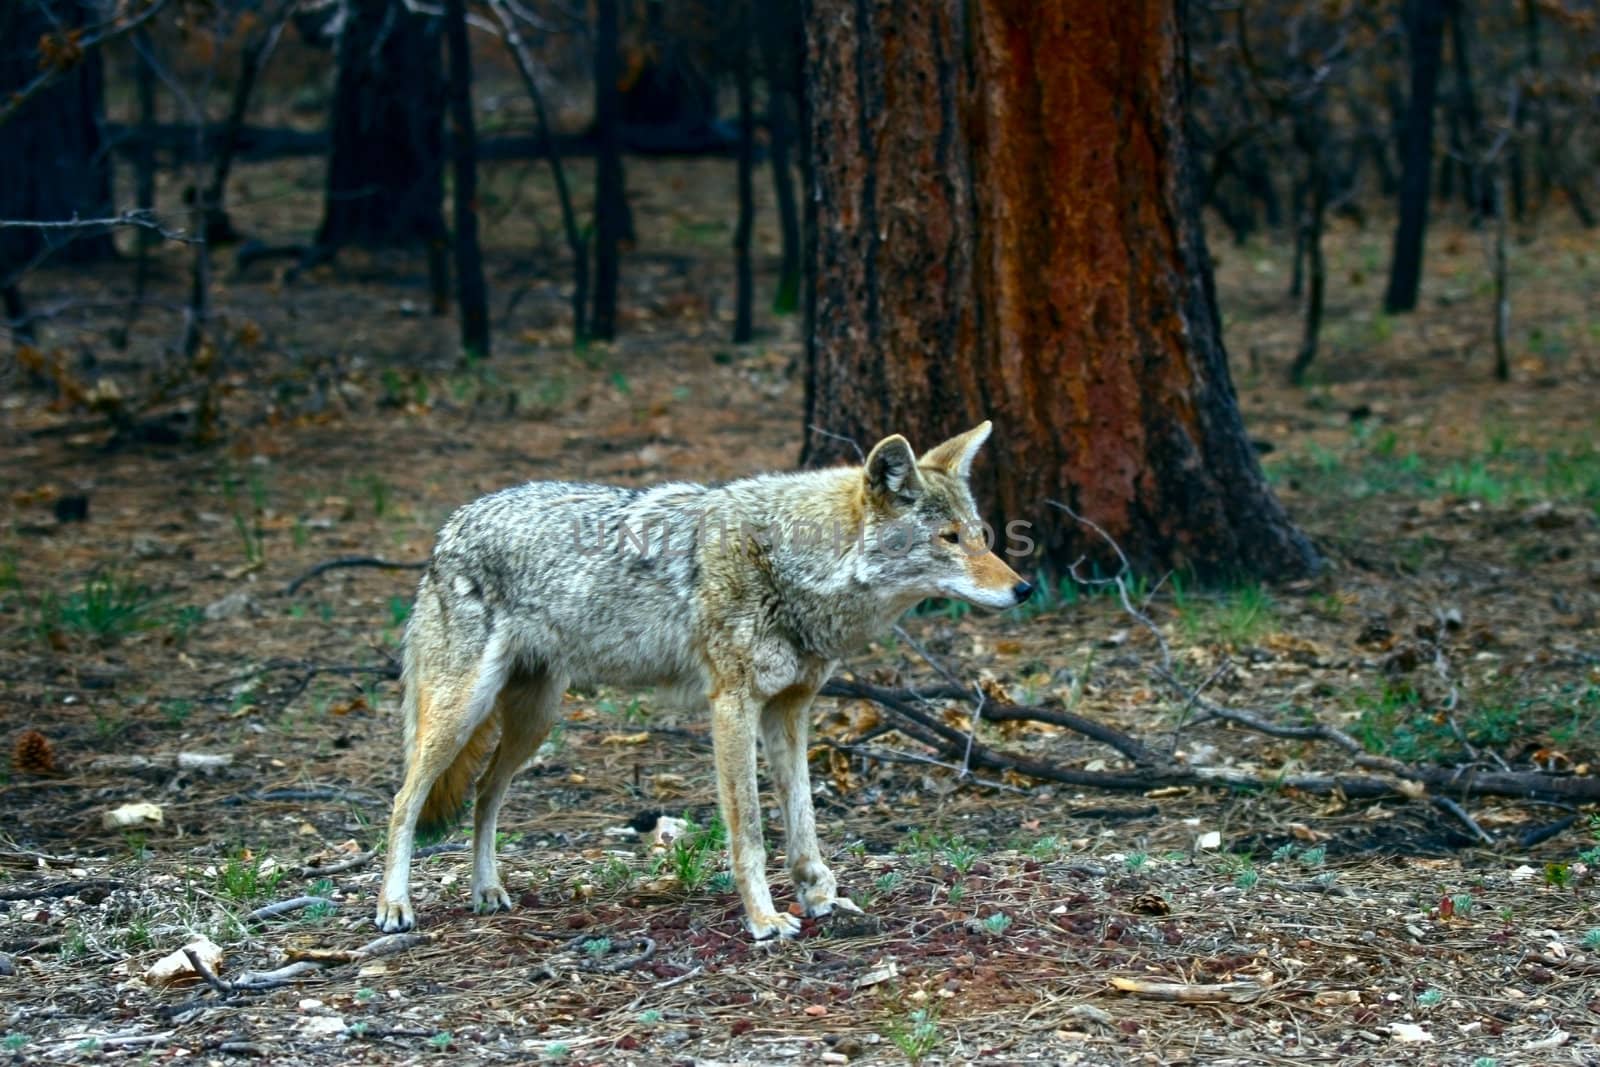 Injured Coyote Bitch by Auldwhispers